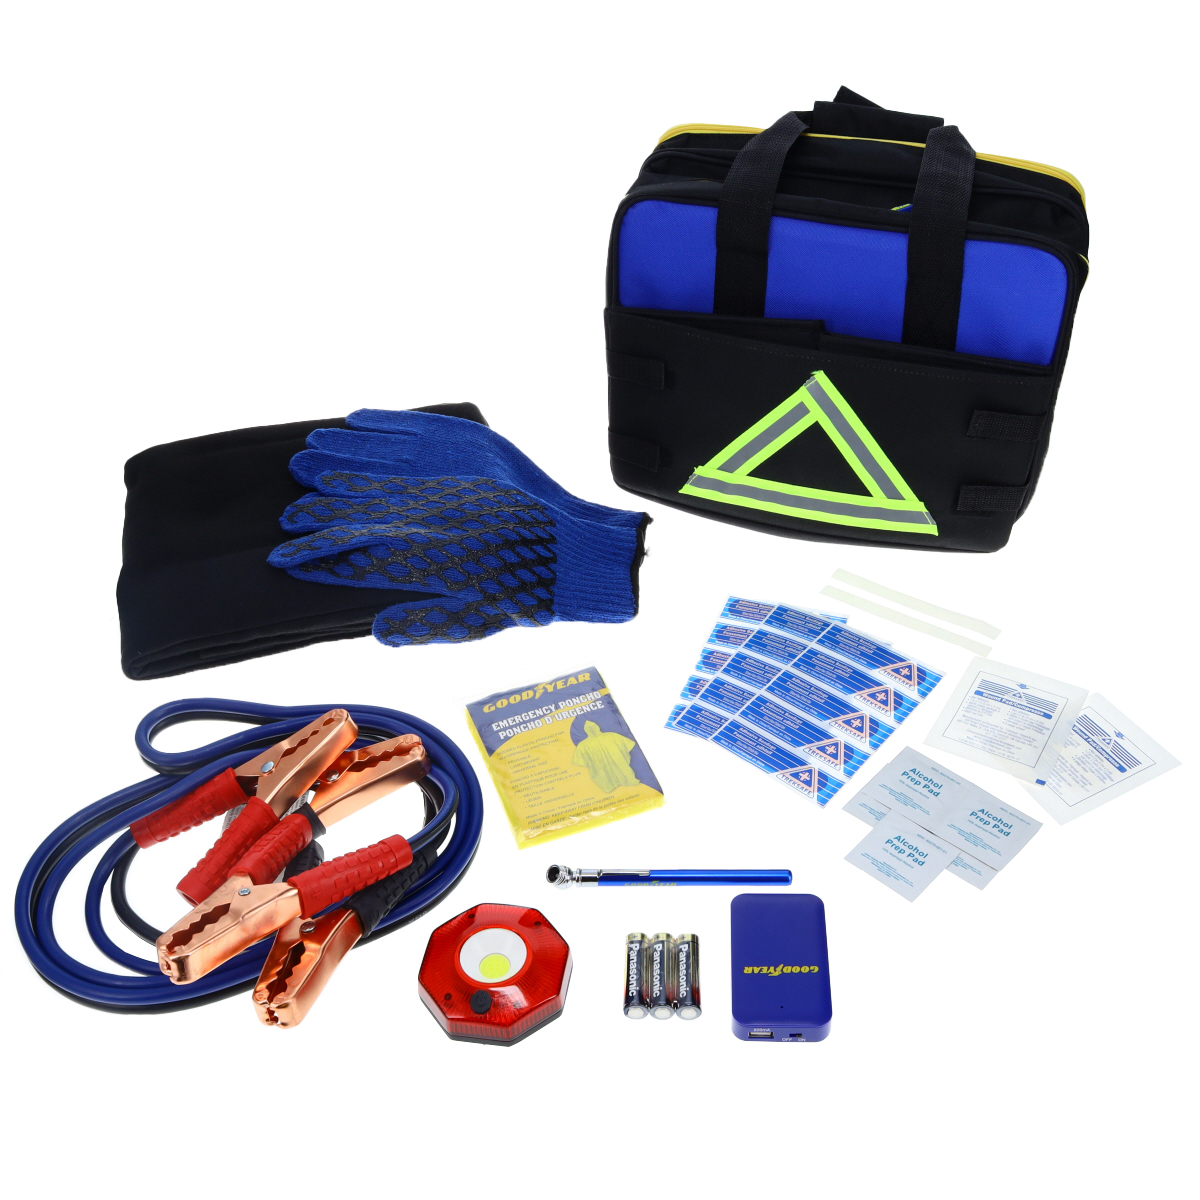 Goodyear Safety and Storage Kit 2 in 1 GY5011 Car Accessories for Women and Men First Aid Roadside Assistance Kit